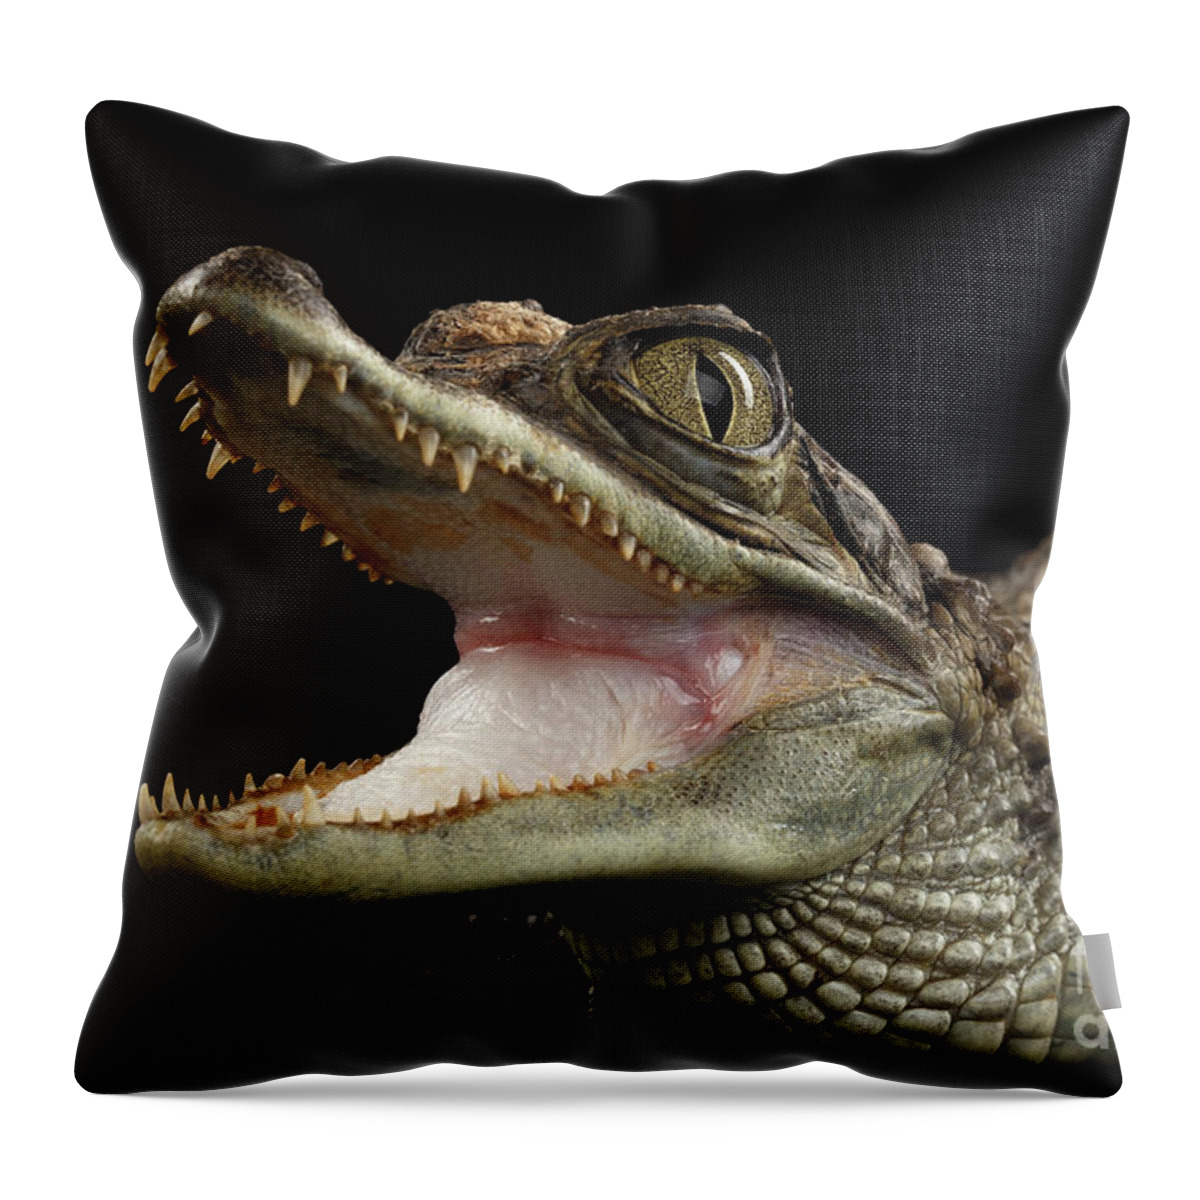 Crocodile Throw Pillow featuring the photograph Closeup Young Cayman Crocodile, Reptile with opened mouth Isolated on Black Background by Sergey Taran